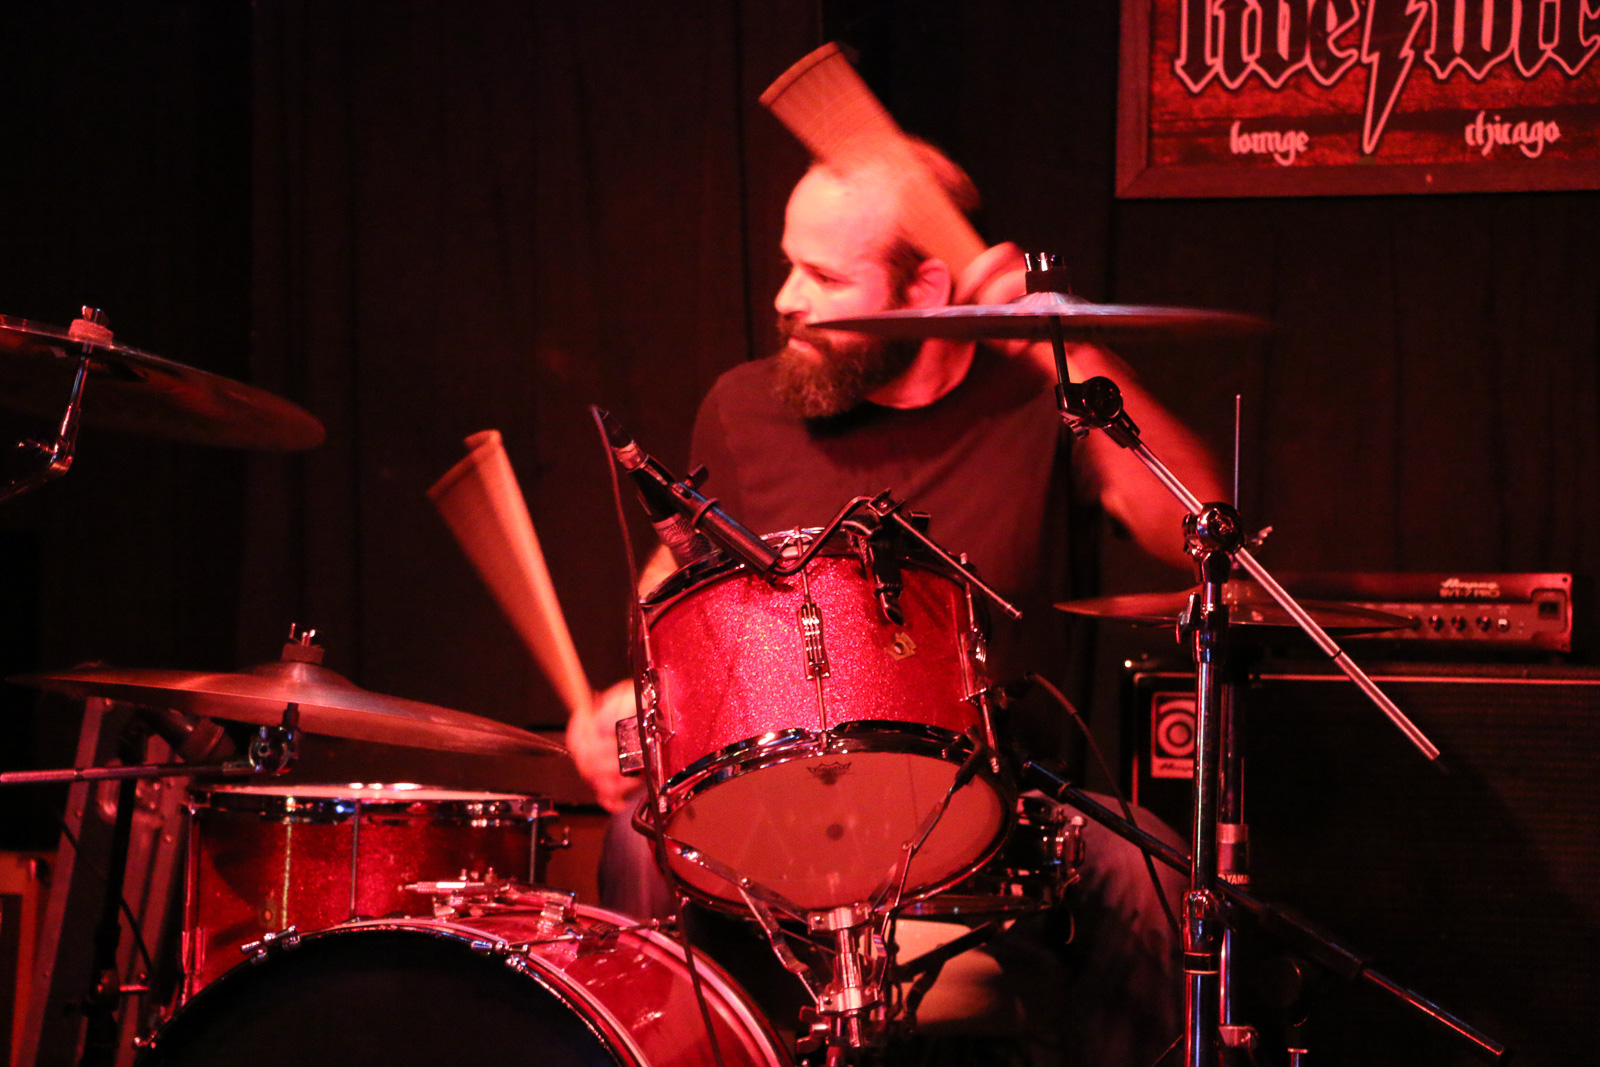 An incredibly good looking bearded man plays drums